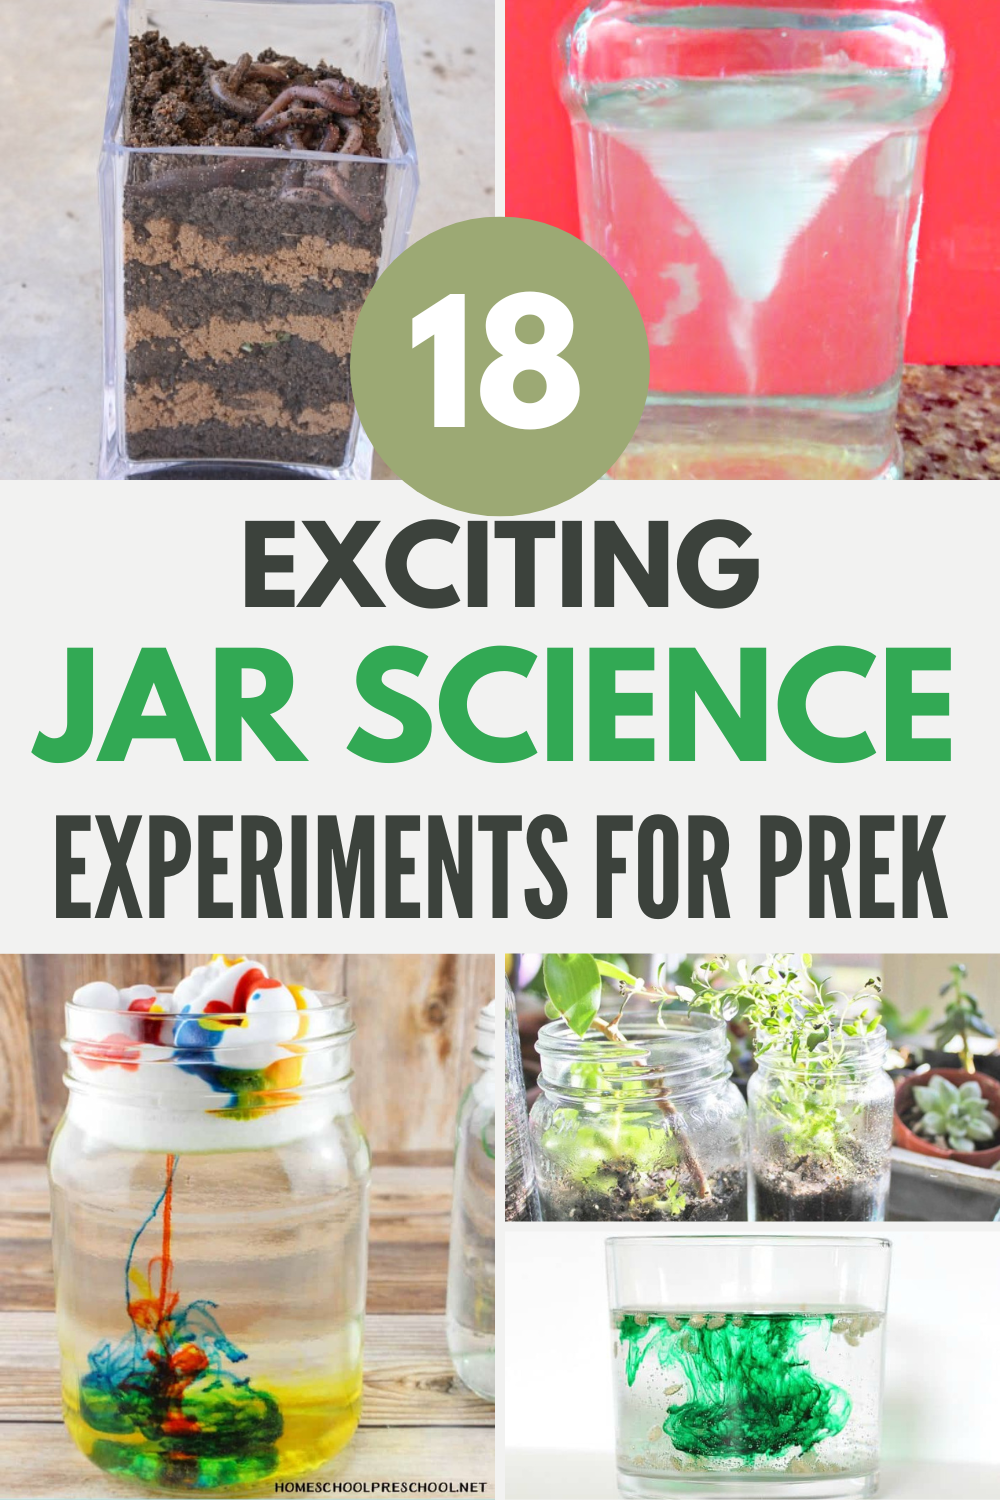 rain-cloud-in-a-jar How to Engage Preschoolers with Jar Science Experiments